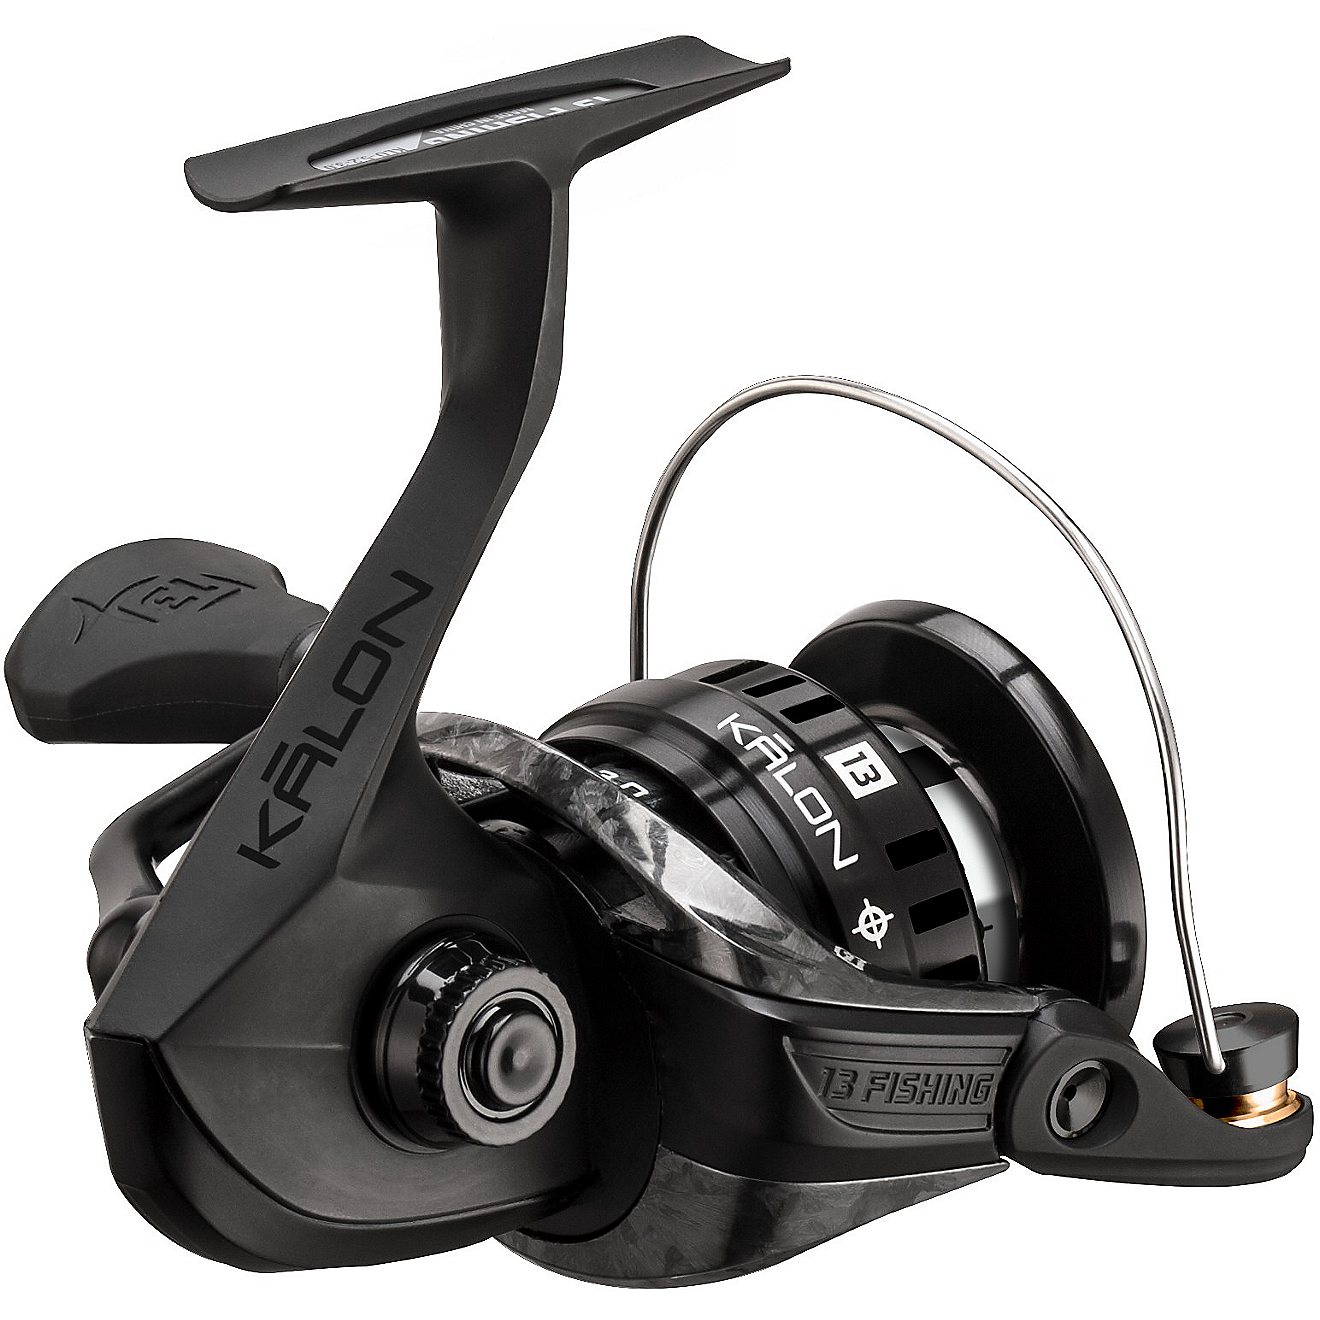 13 Fishing Blackout Series Kalon Specialty Spinning Reel                                                                         - view number 2